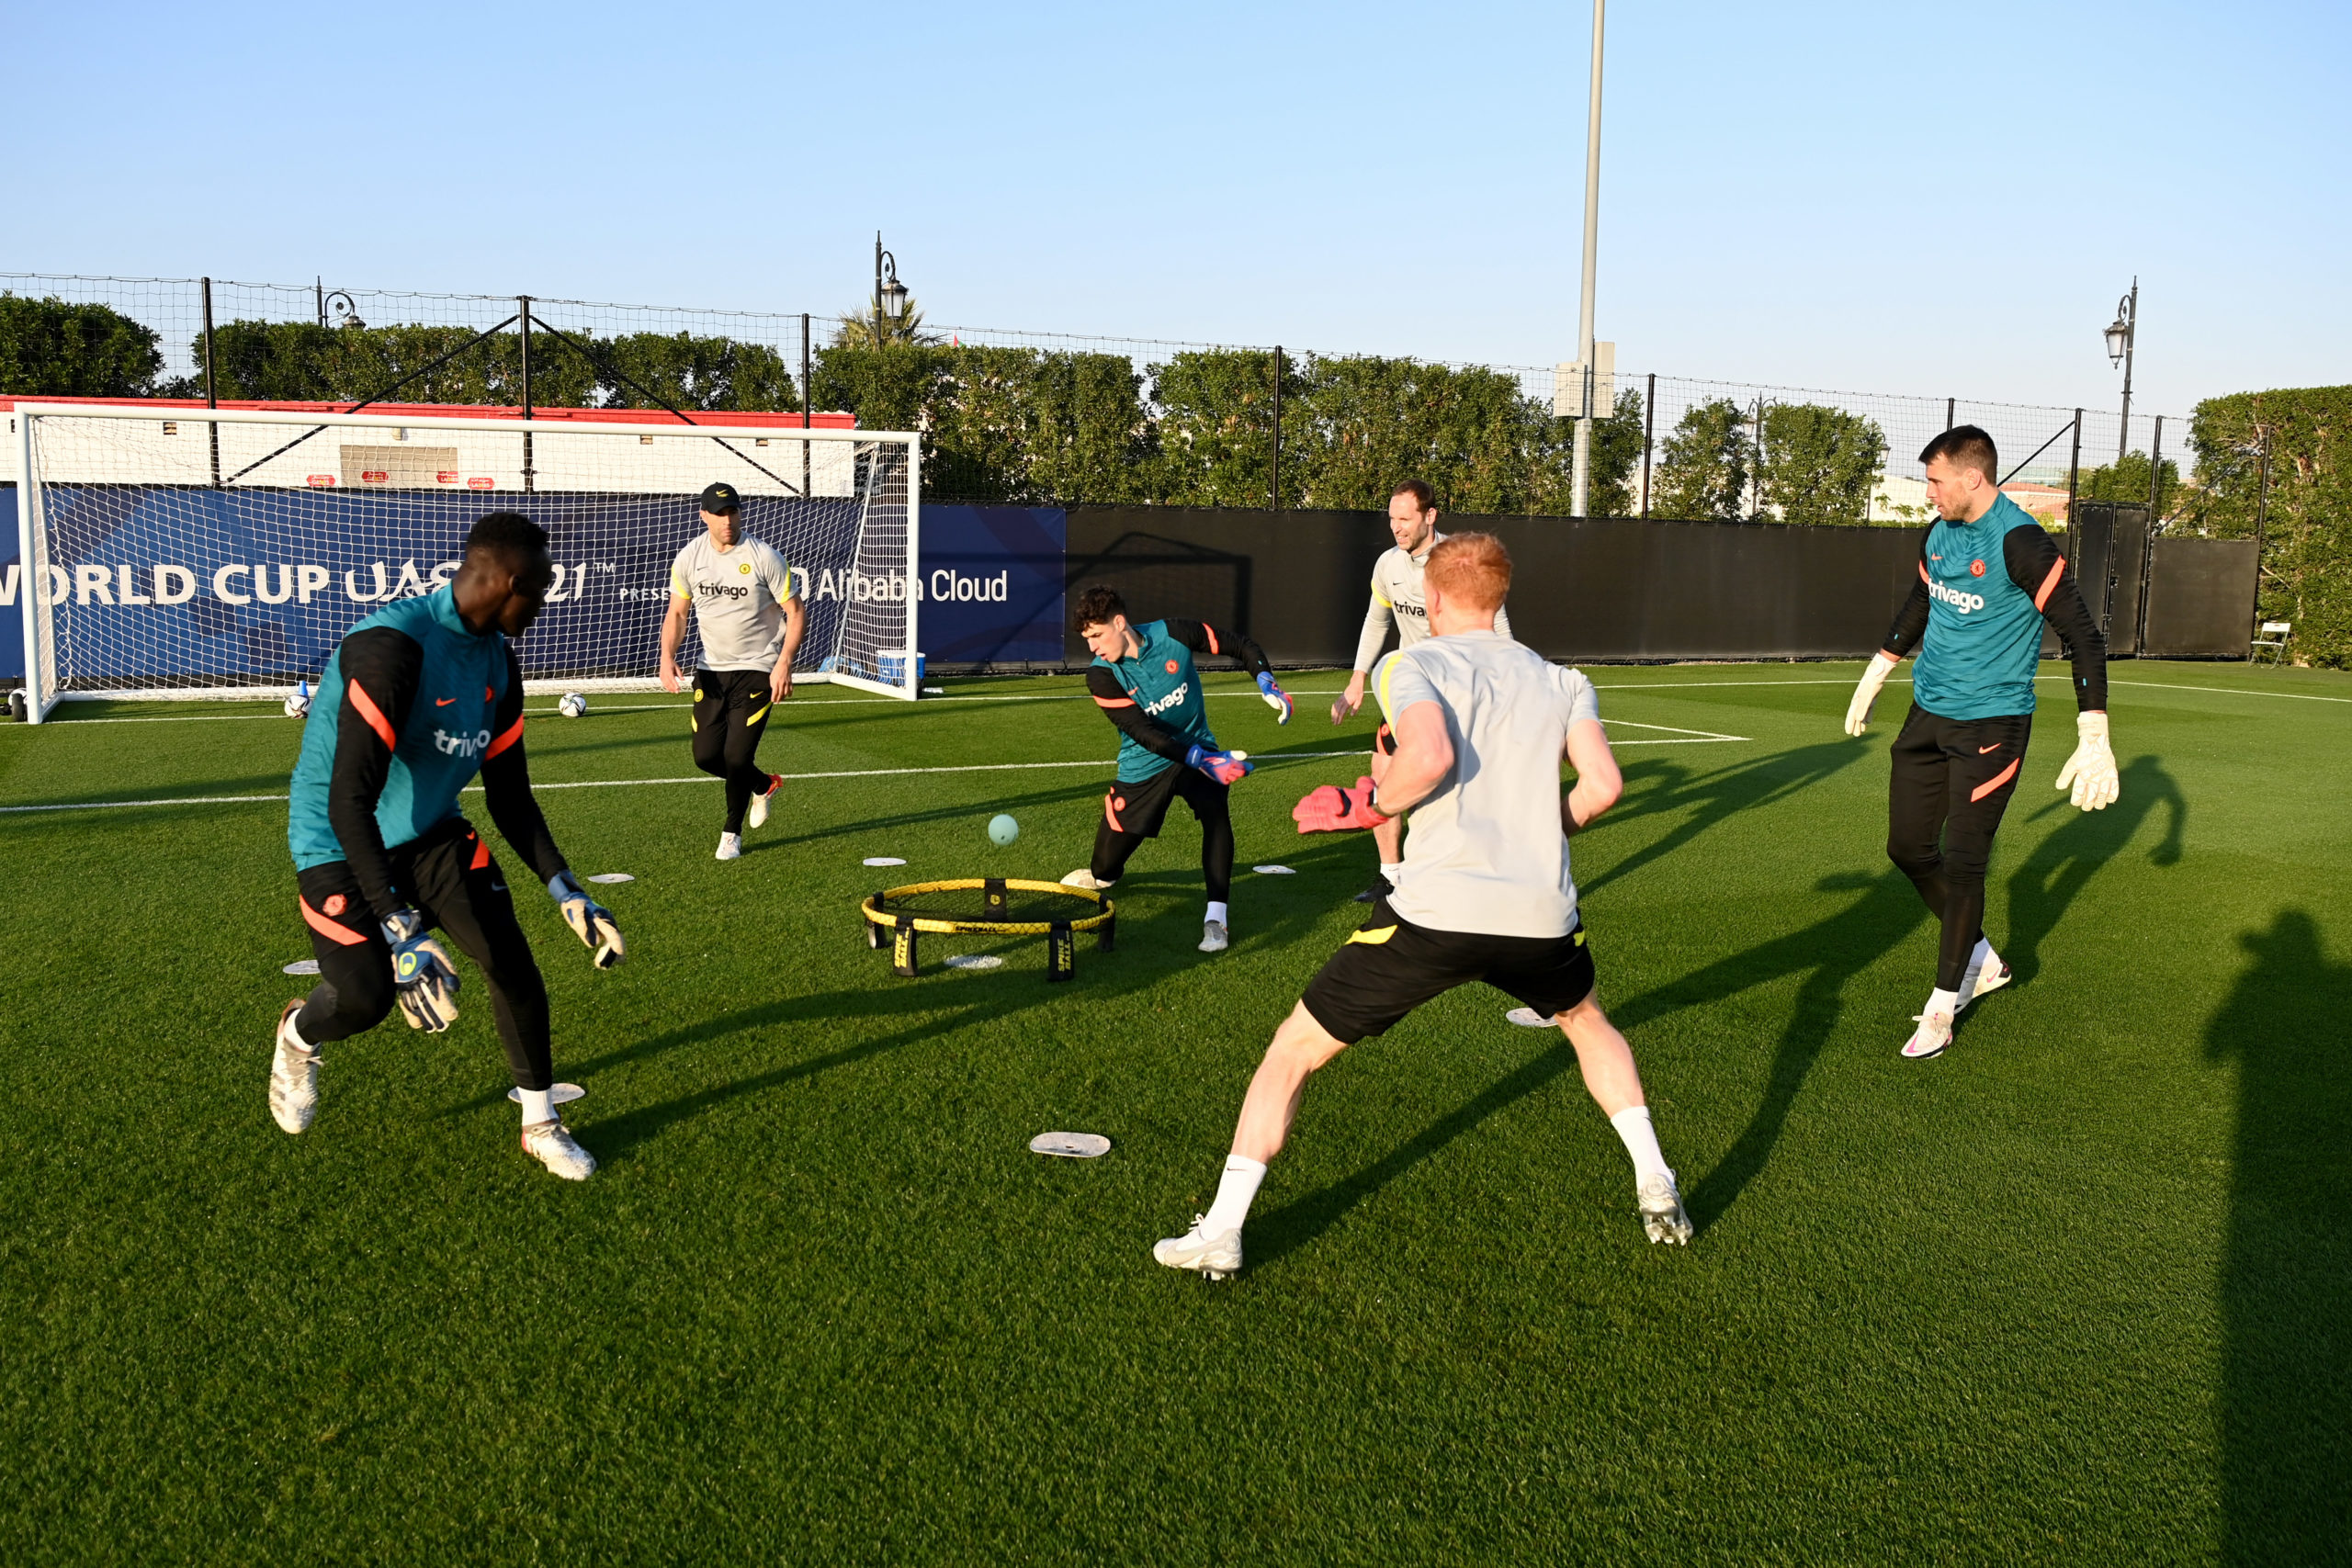 Chelsea Training Session: FIFA World Club Cup